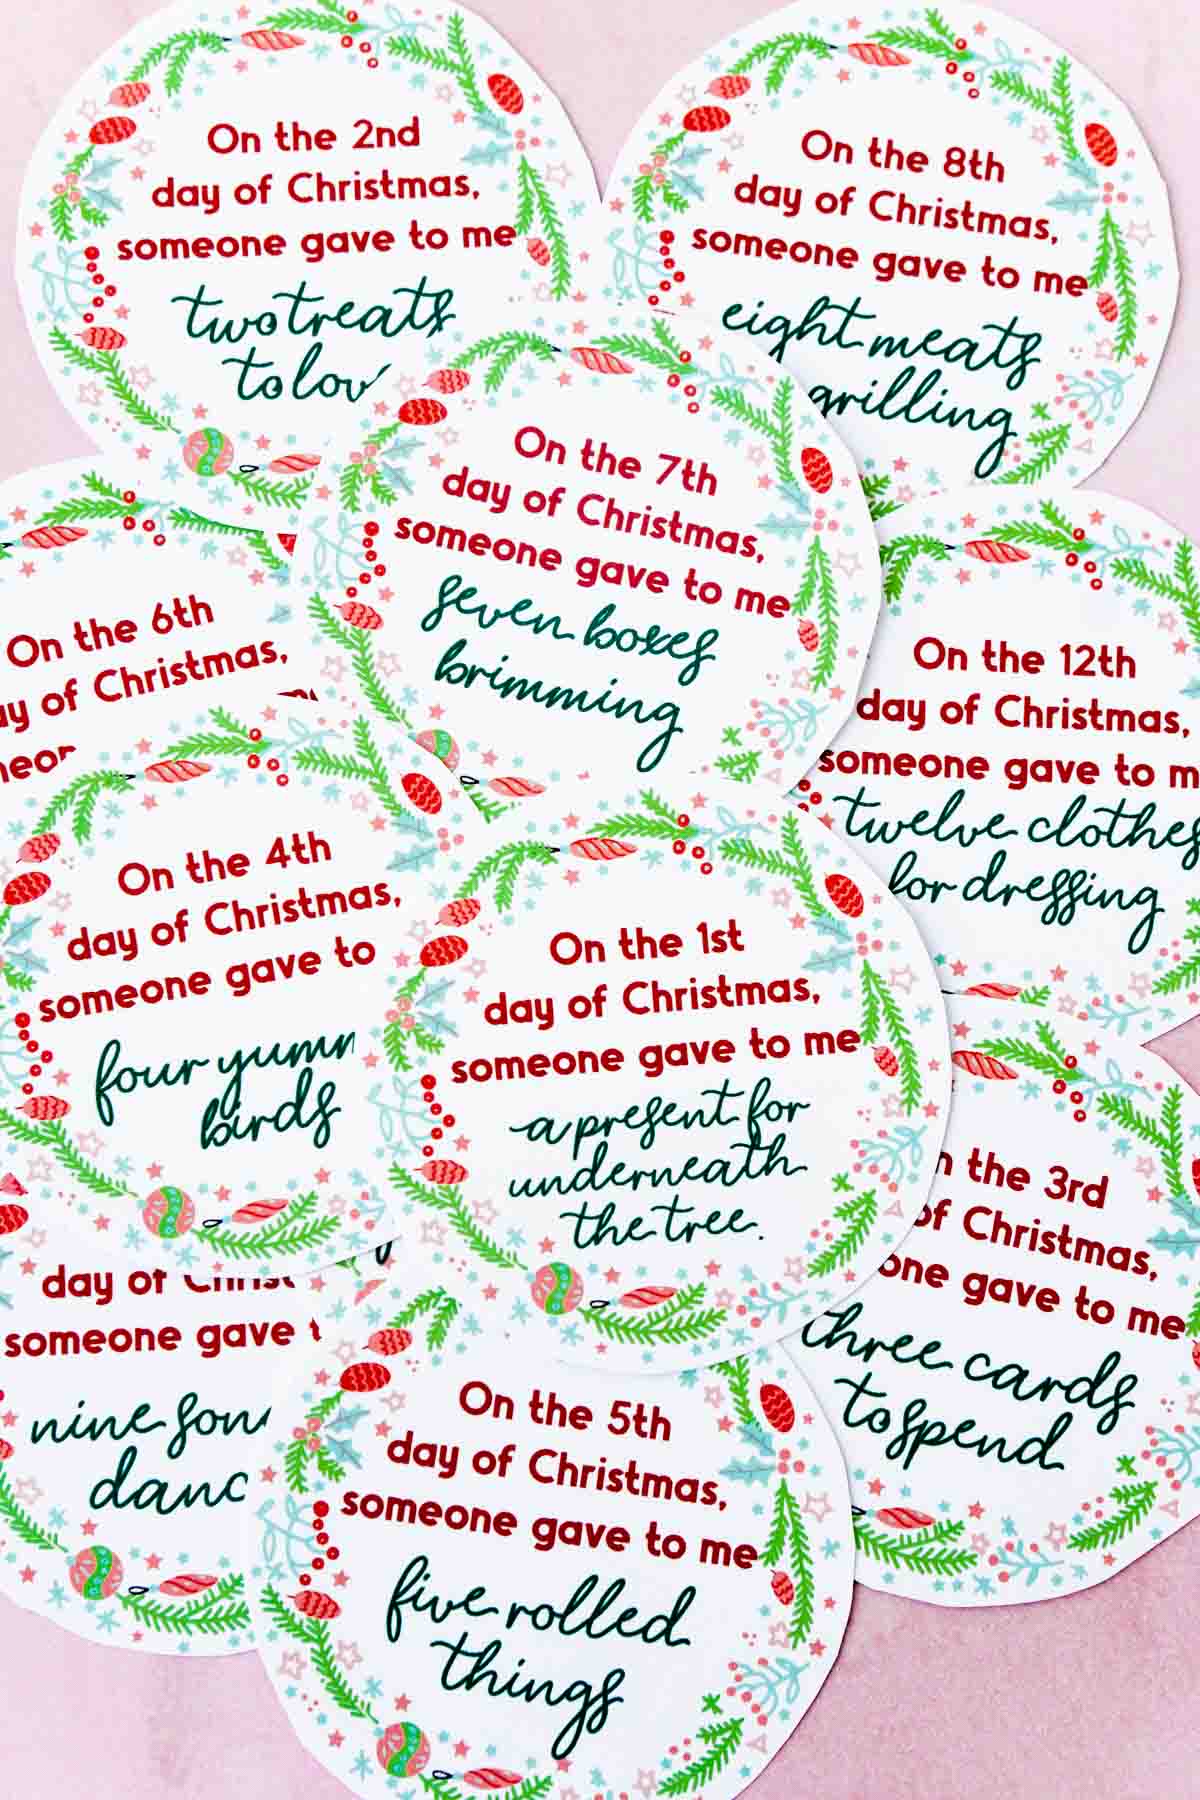 what-do-the-gifts-in-the-12-days-of-christmas-represent-printable-online